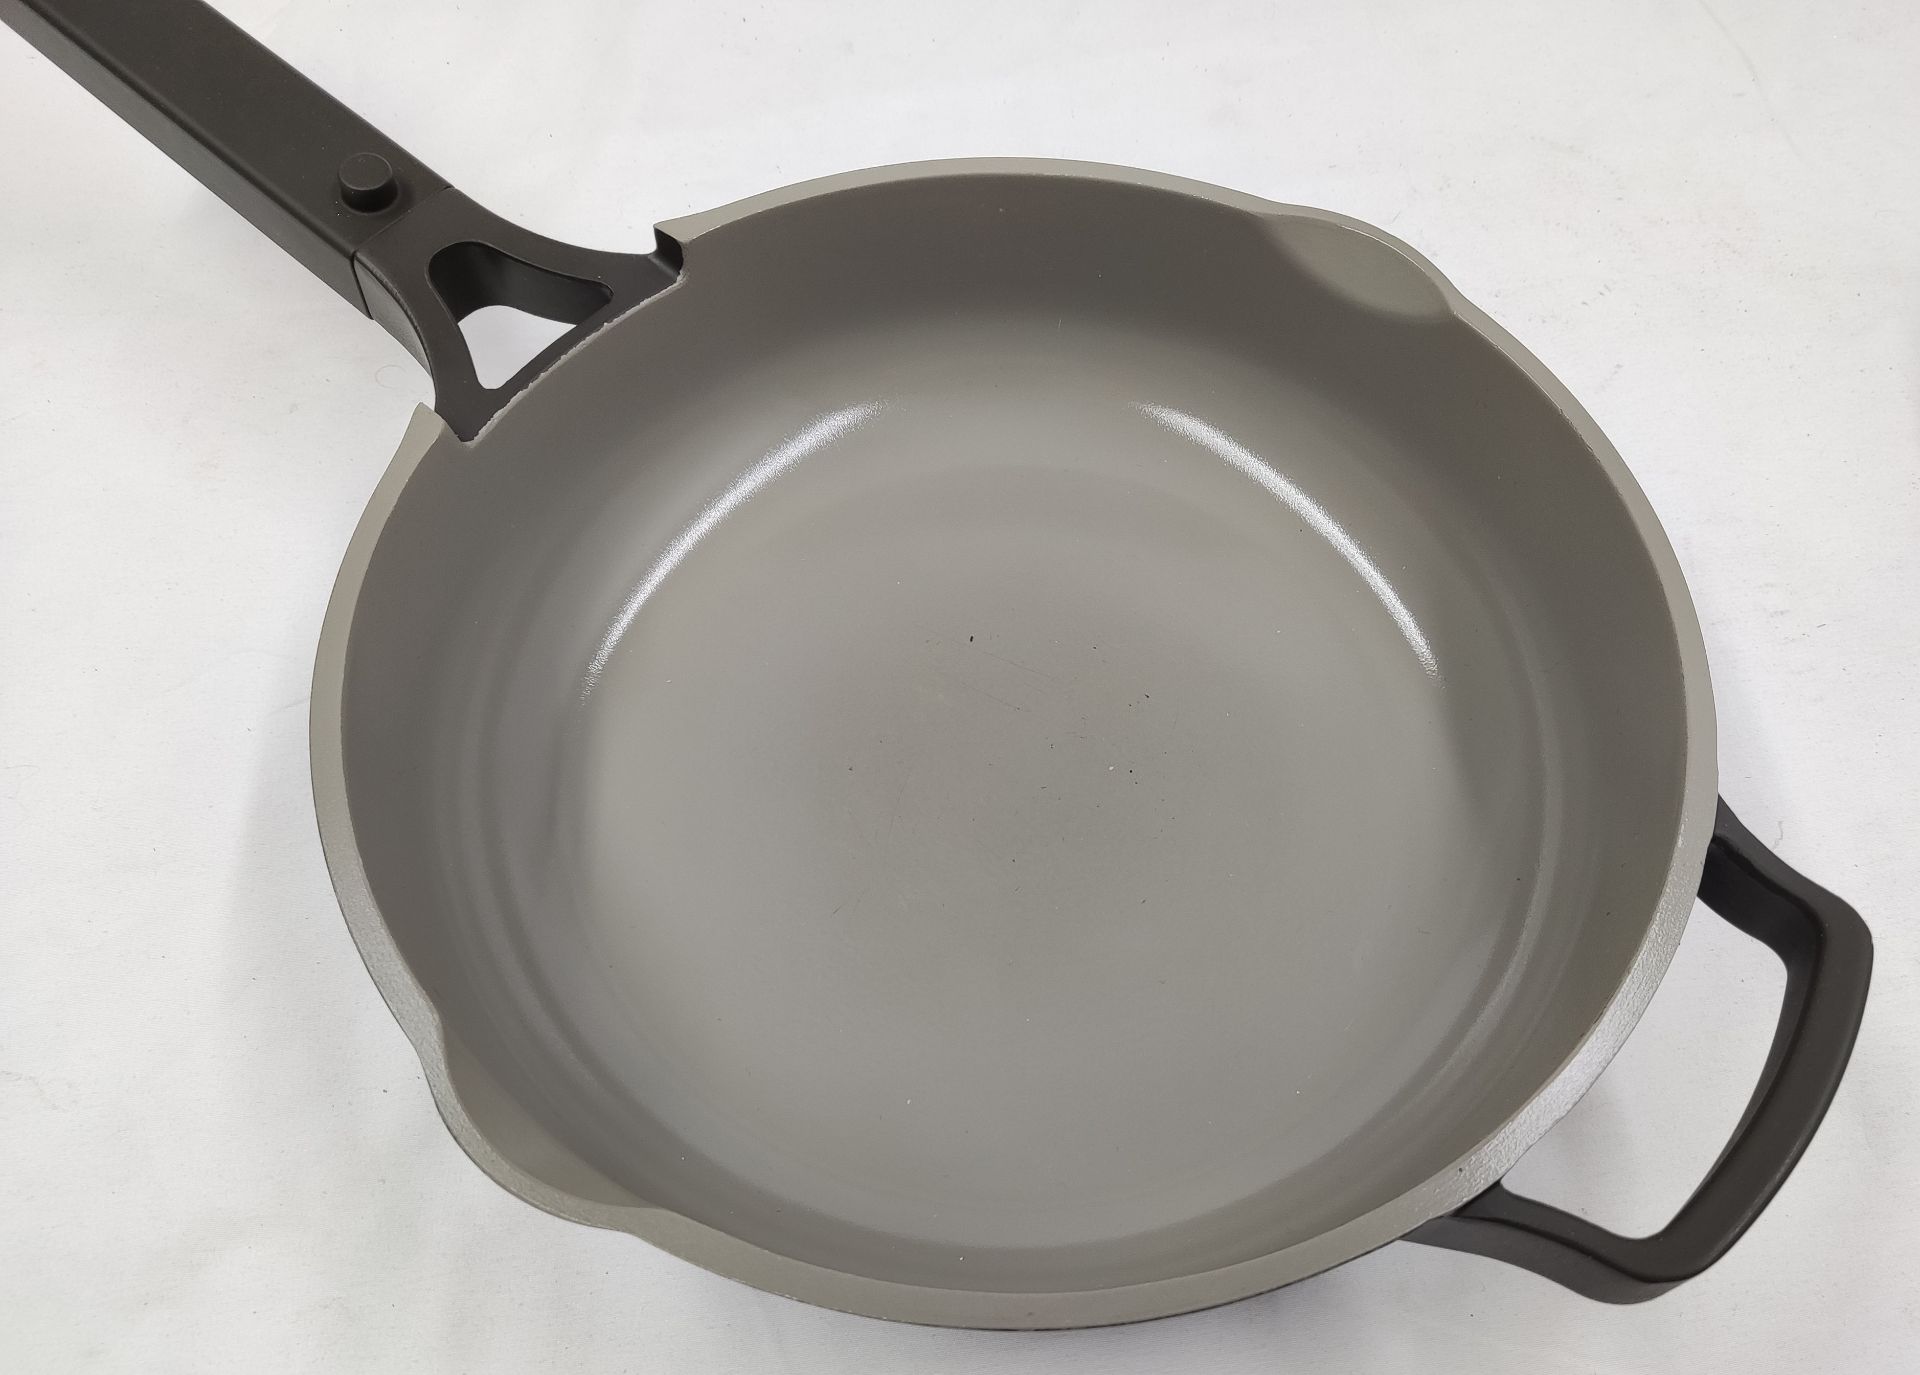 1 x OUR PLACE Our Place Cast Iron Always Pan In Charcoal - RRP £135 - Ref: 7260391/HOC165/HC6 - - Image 14 of 17